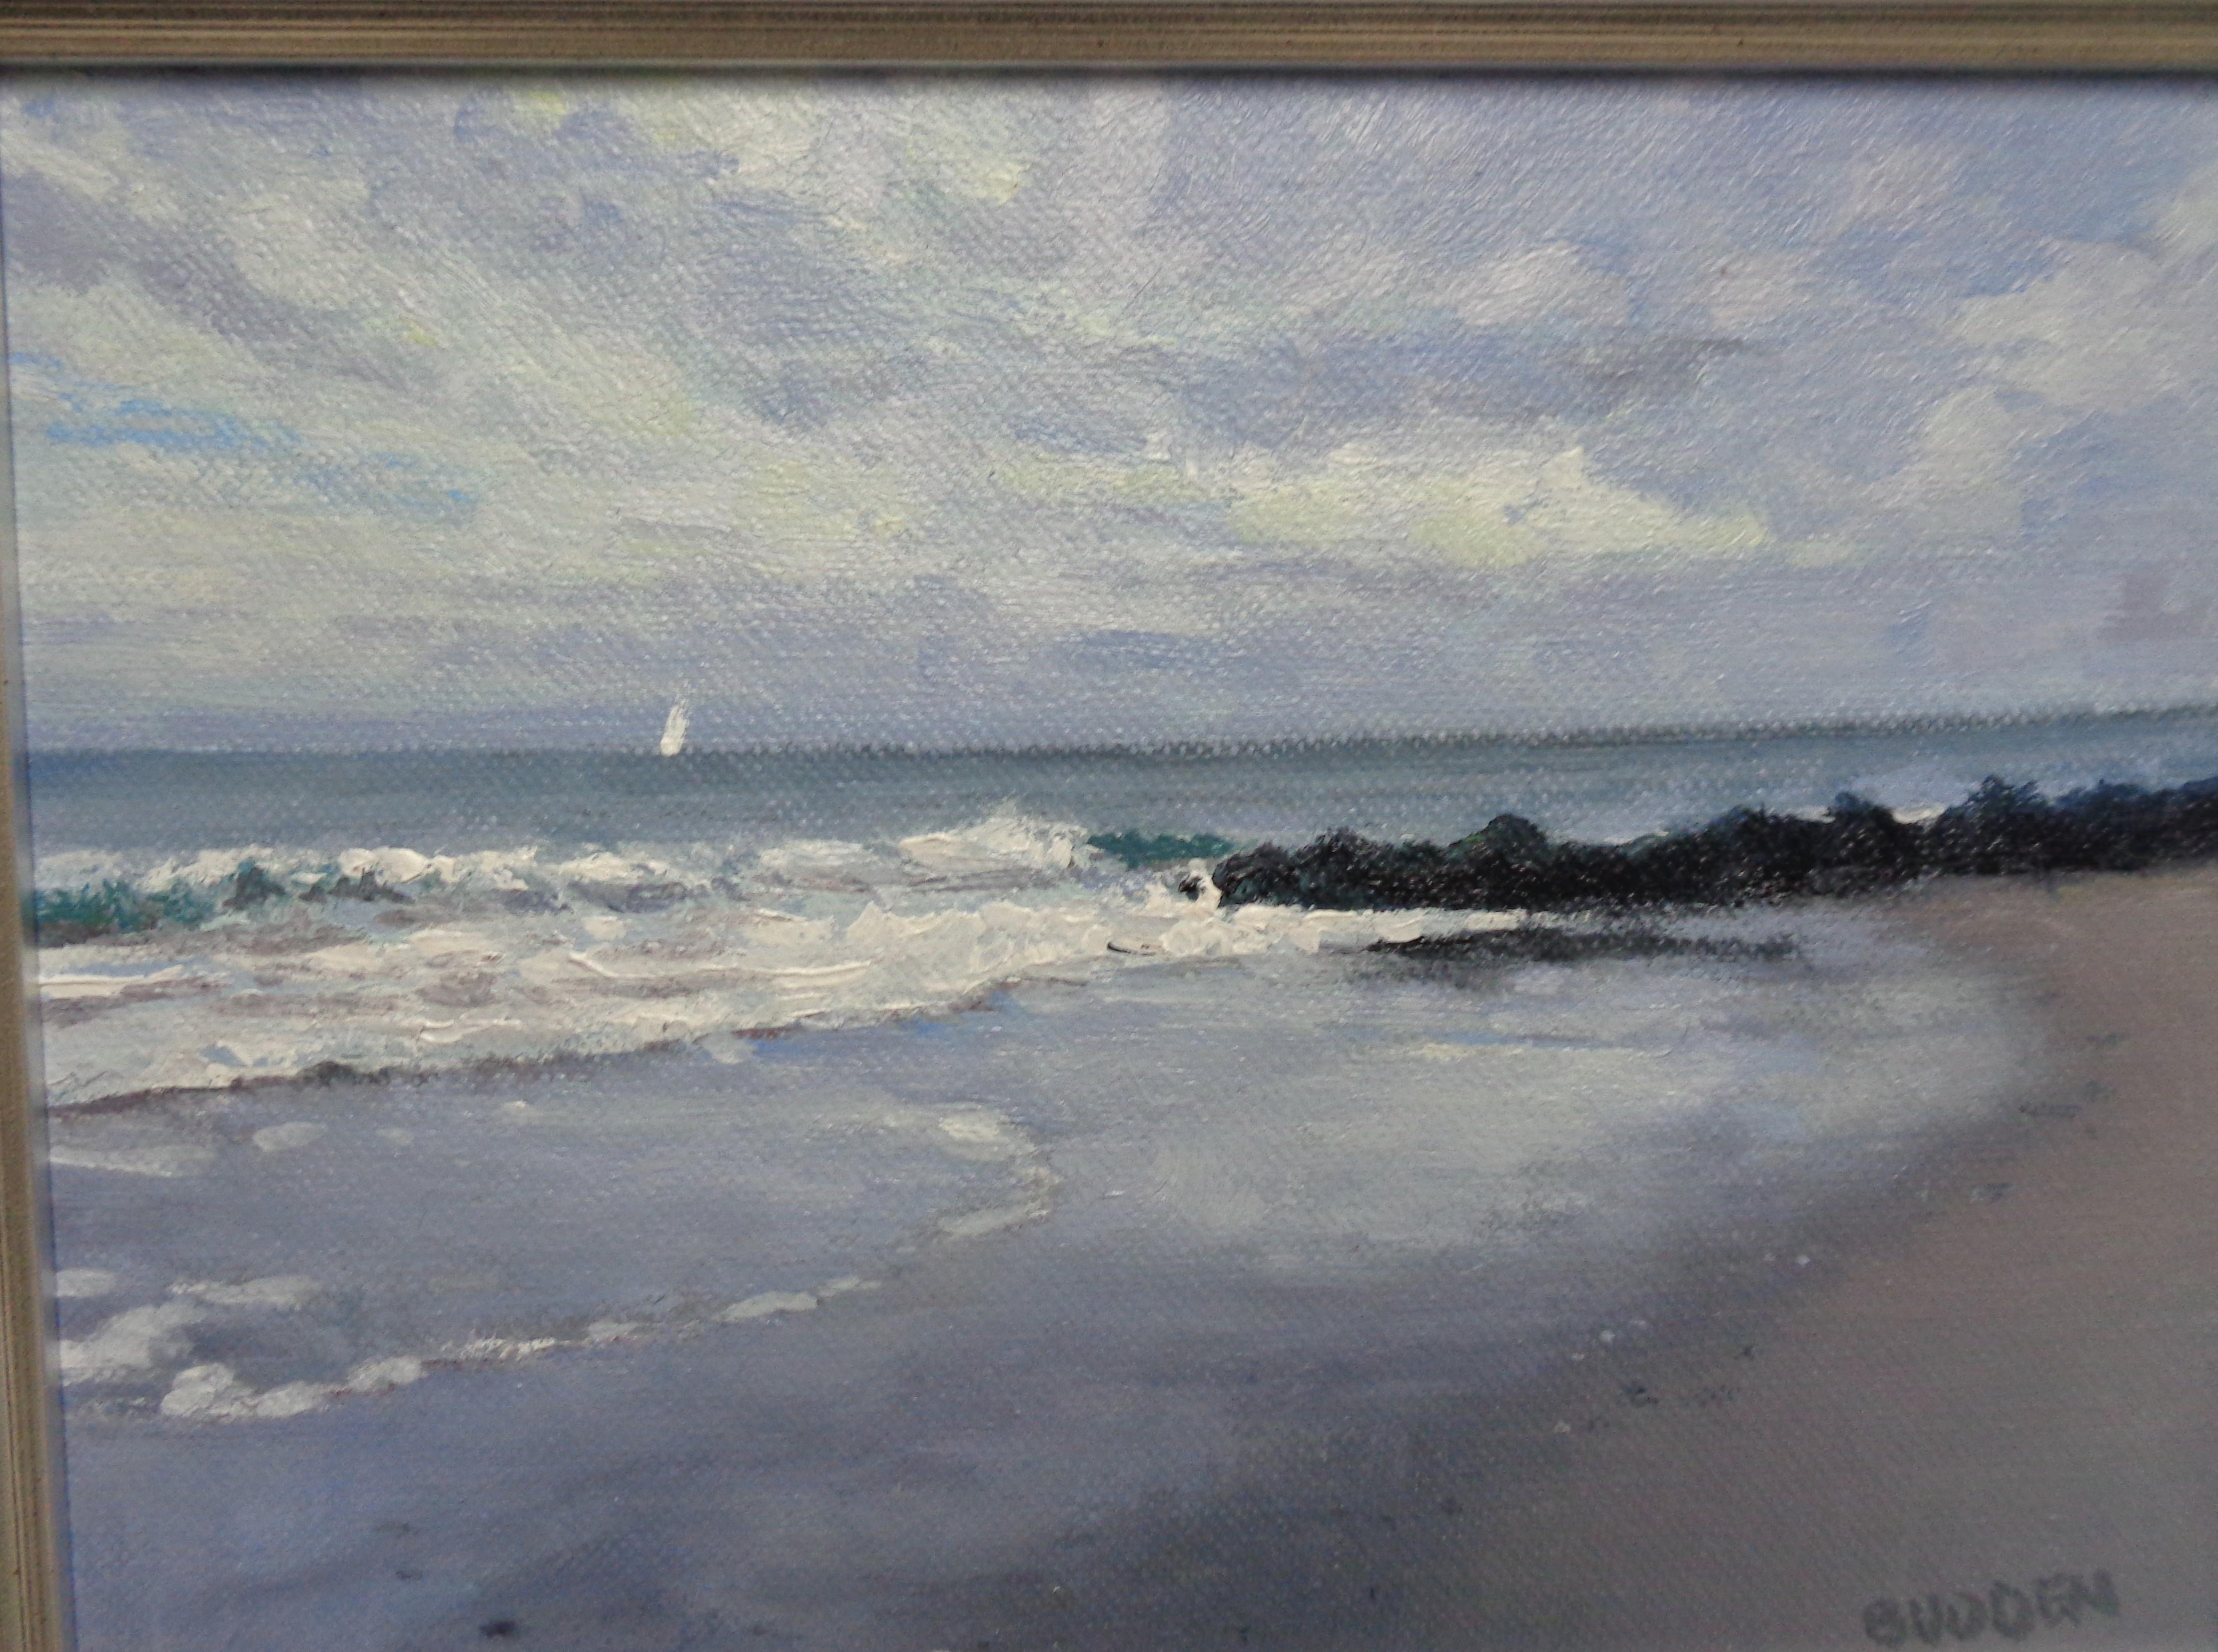  Impressionistic Seascape Oil Painting Michael Budden Beach Ocean Sail Boat Surf For Sale 3